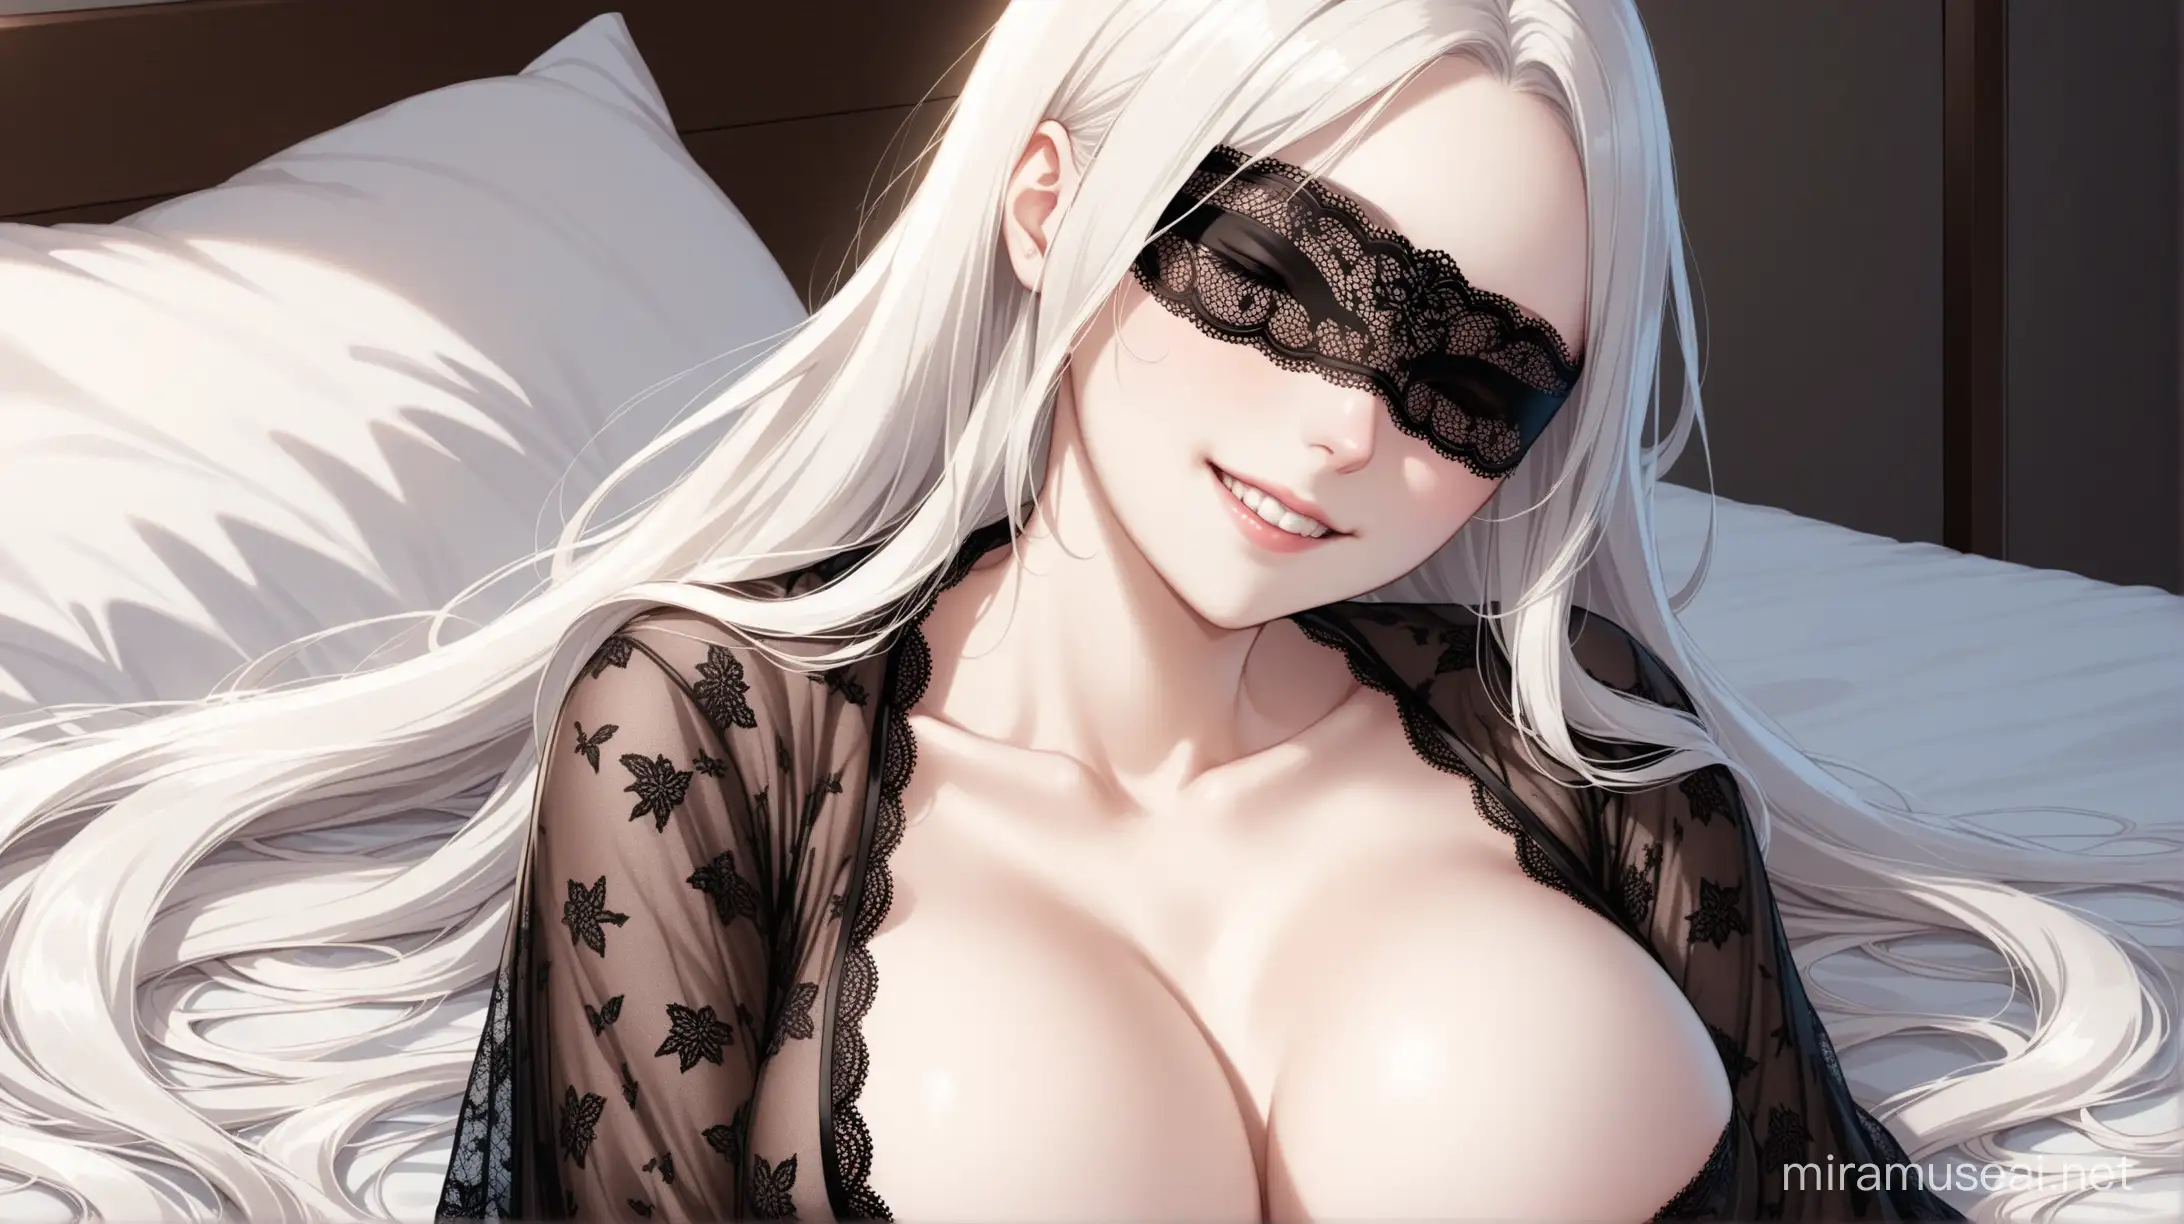 A beautiful woman, with pale skin, white long  hair, and big breasts, wearing a black lace robe that is exposing her chest, and a black blindfold, lying in bed, smiling at the viewer 